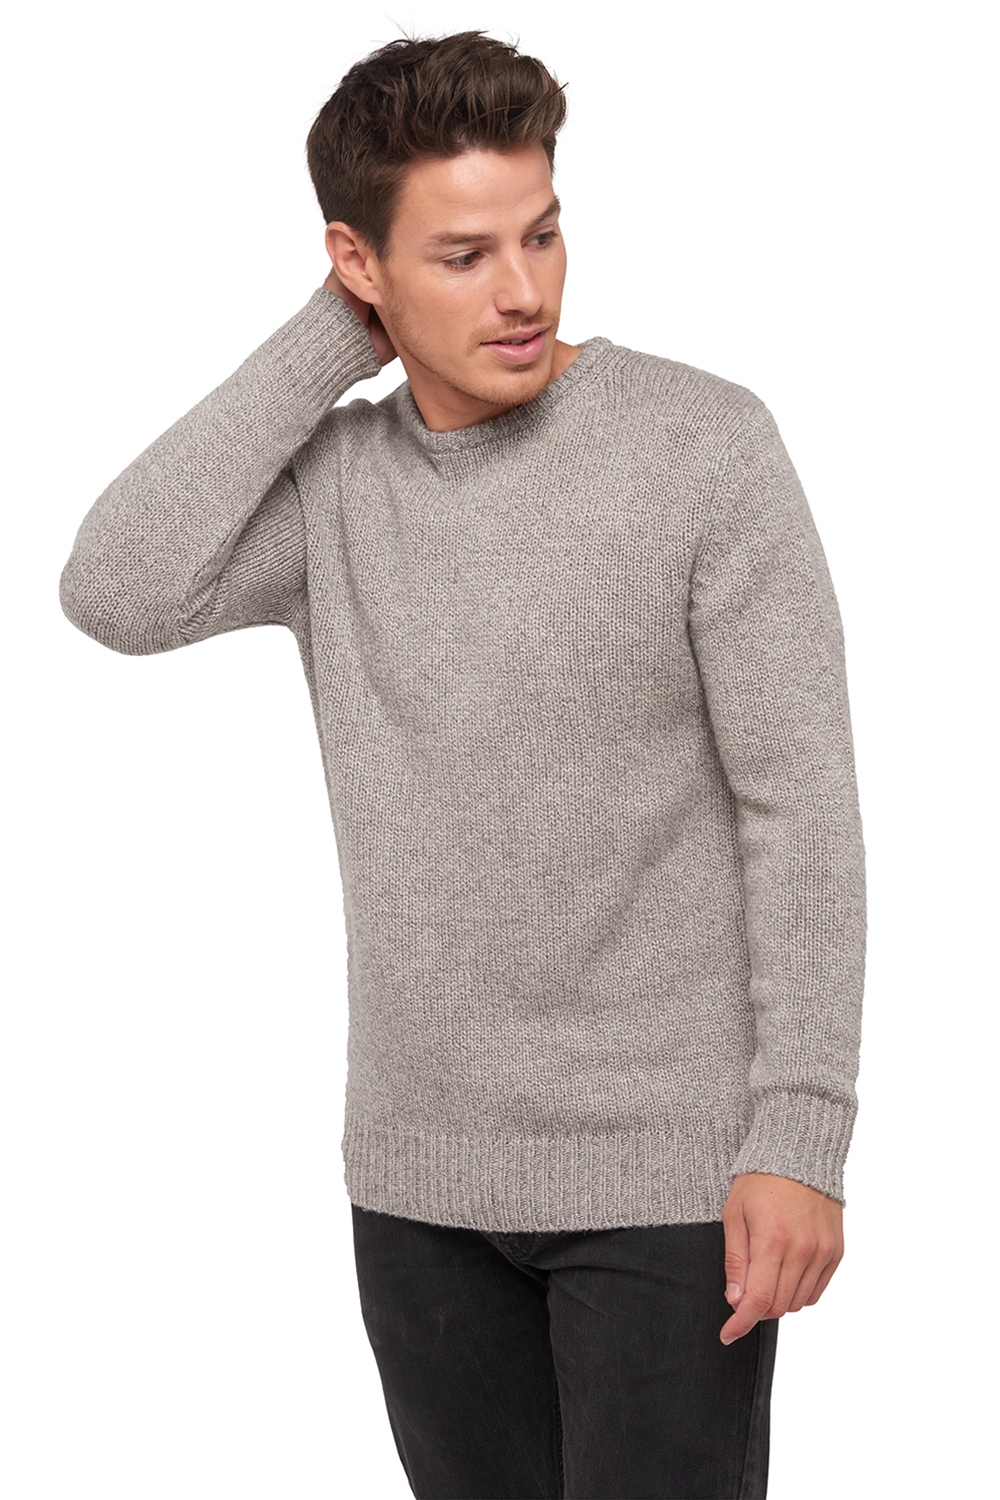 Chameau pull homme col rond cole pierre 3xl